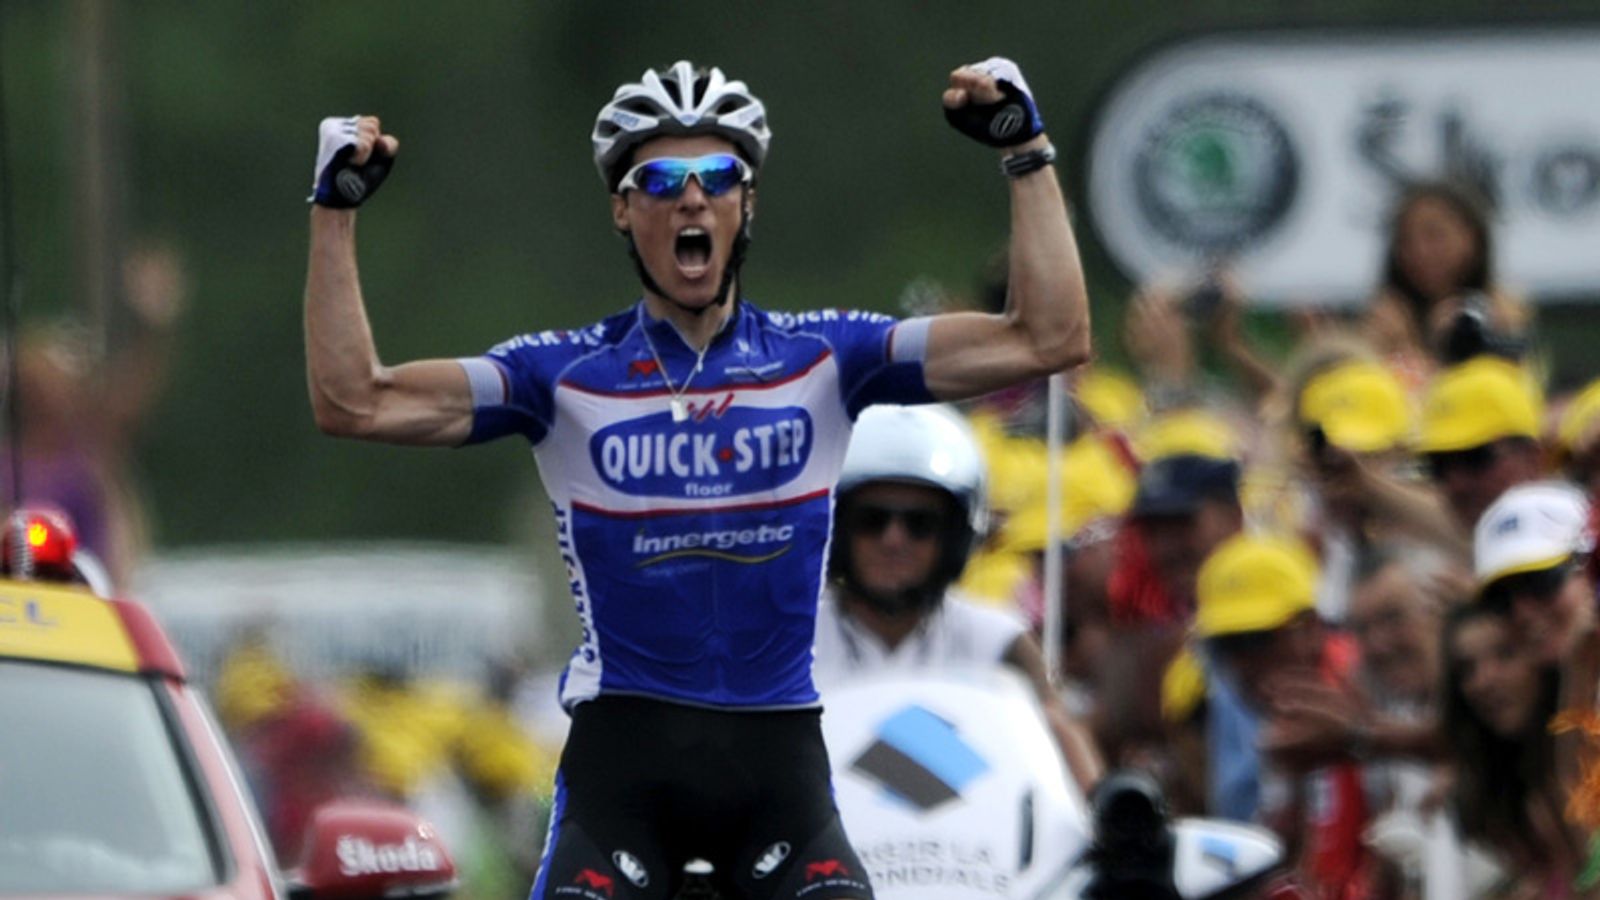 Double delight for Chavanel | Cycling News | Sky Sports